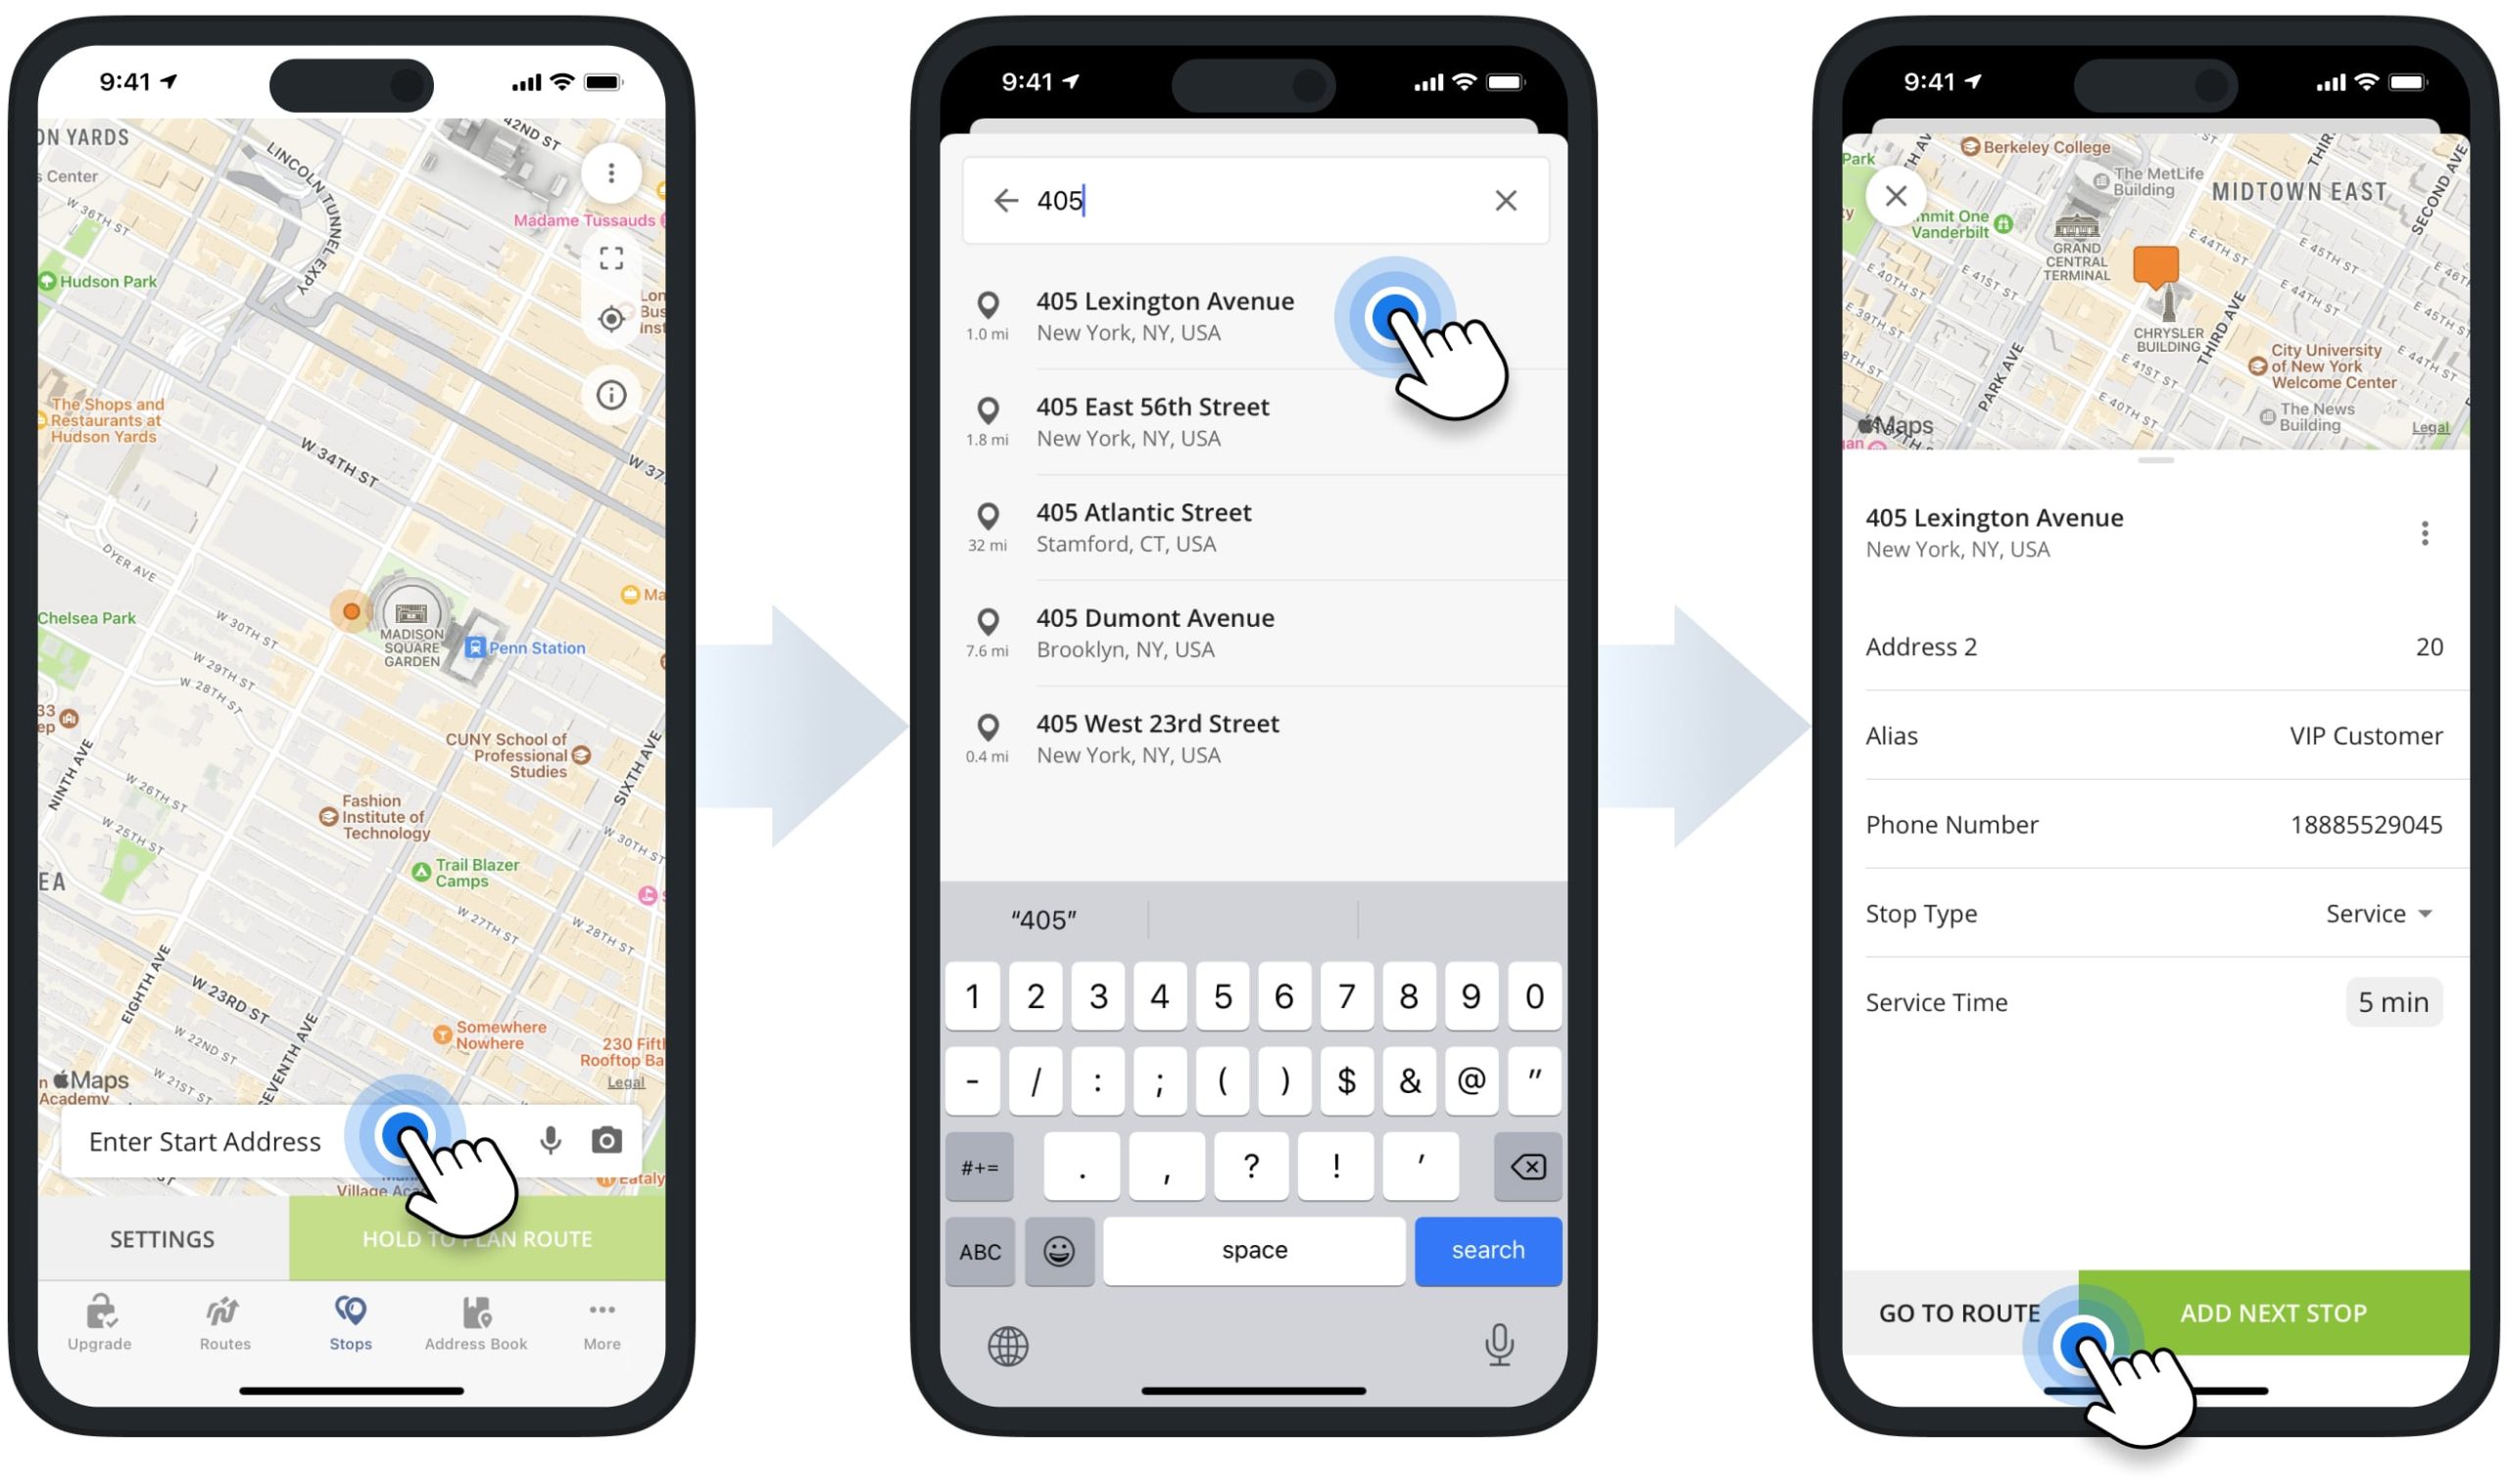 Geocode, validate, and add autocompleted addresses to multi-stop routes on the iPhone route planner app.